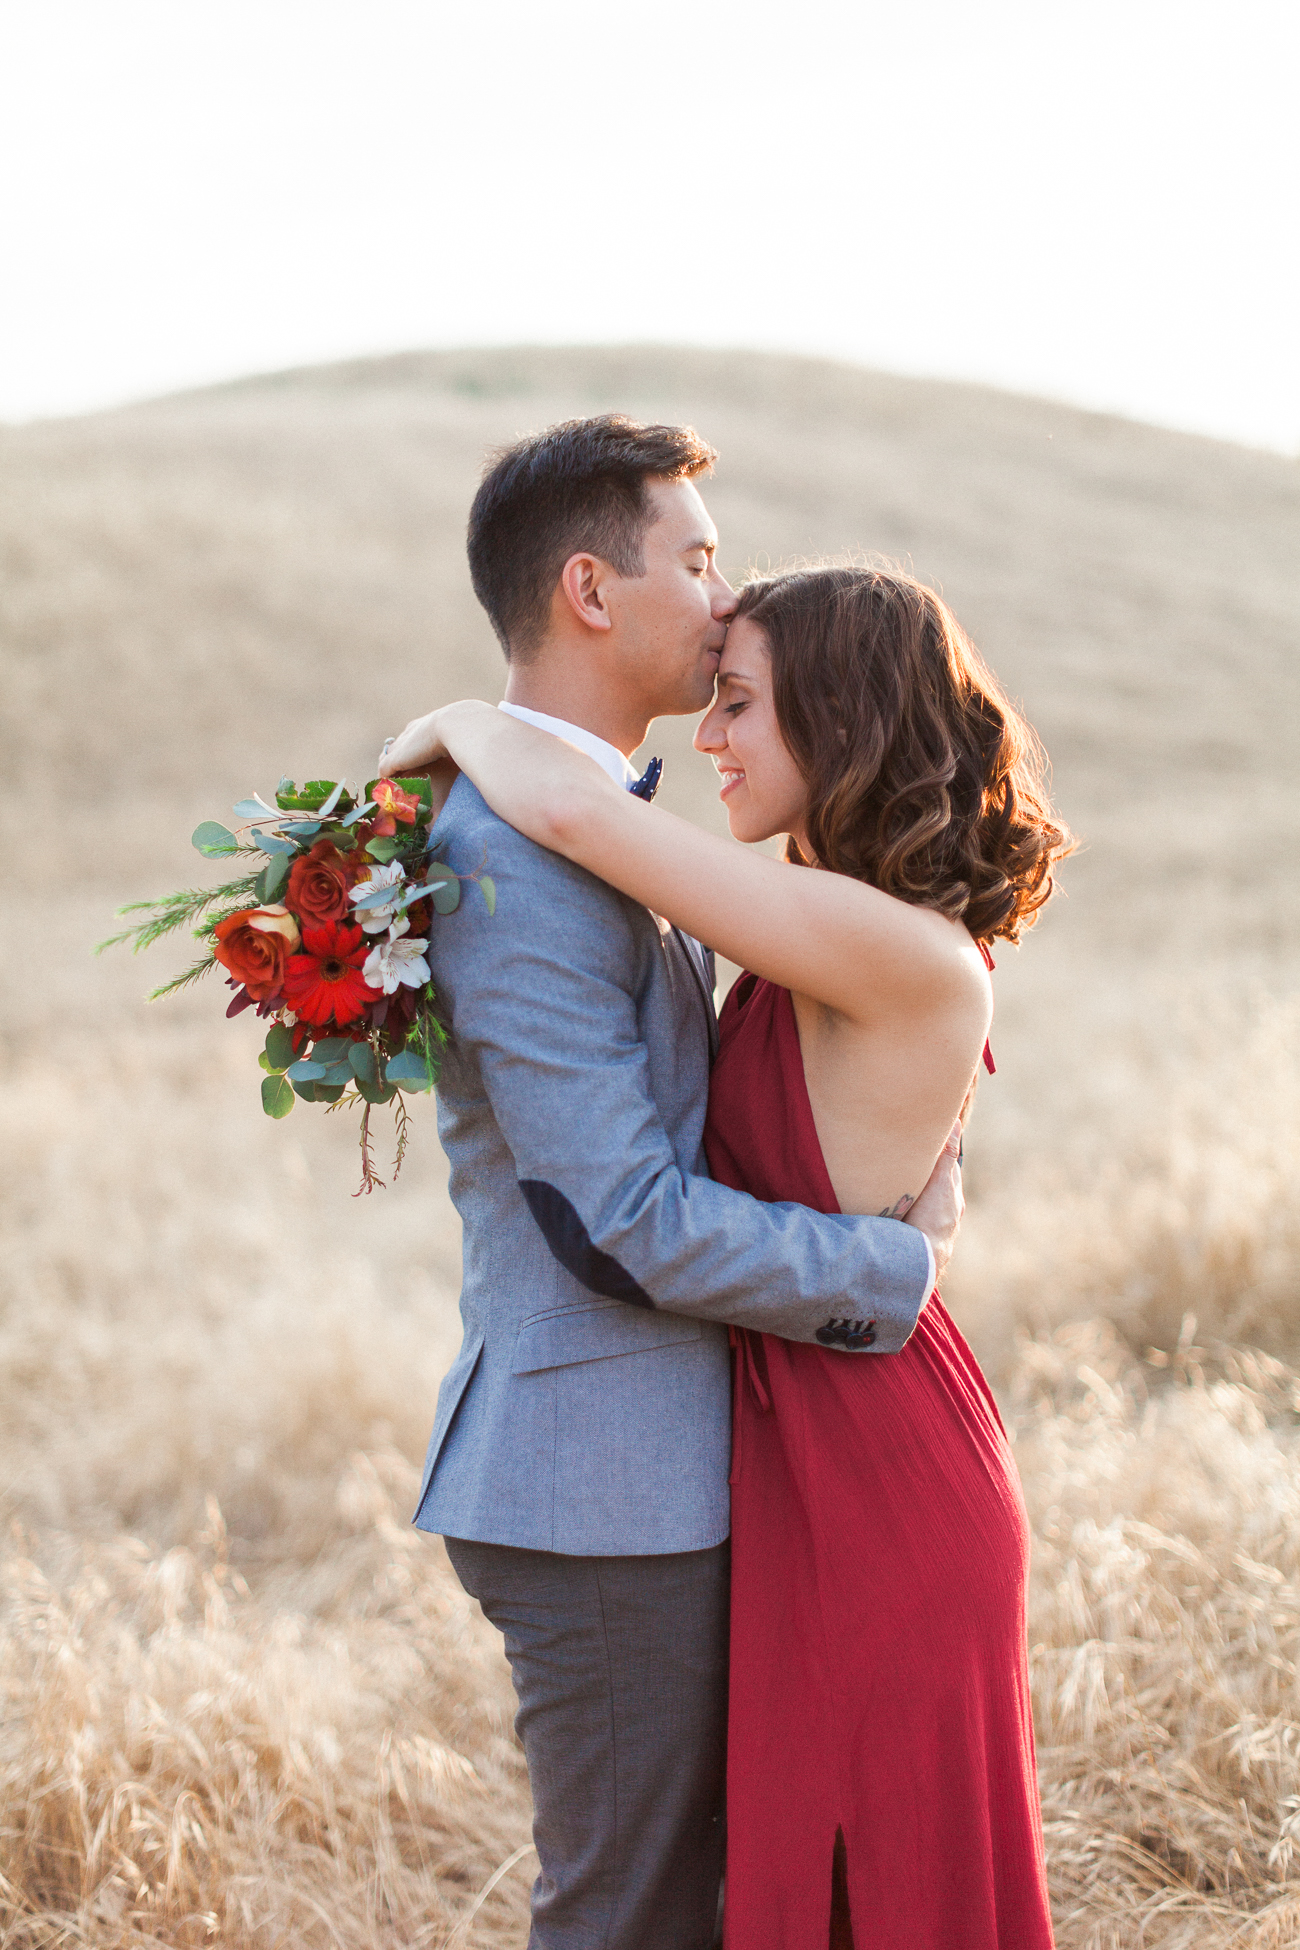 This fun and romantic Orange County engagement is couple goals. The love and adventurous spirit they share is so apparent in every little moment! 